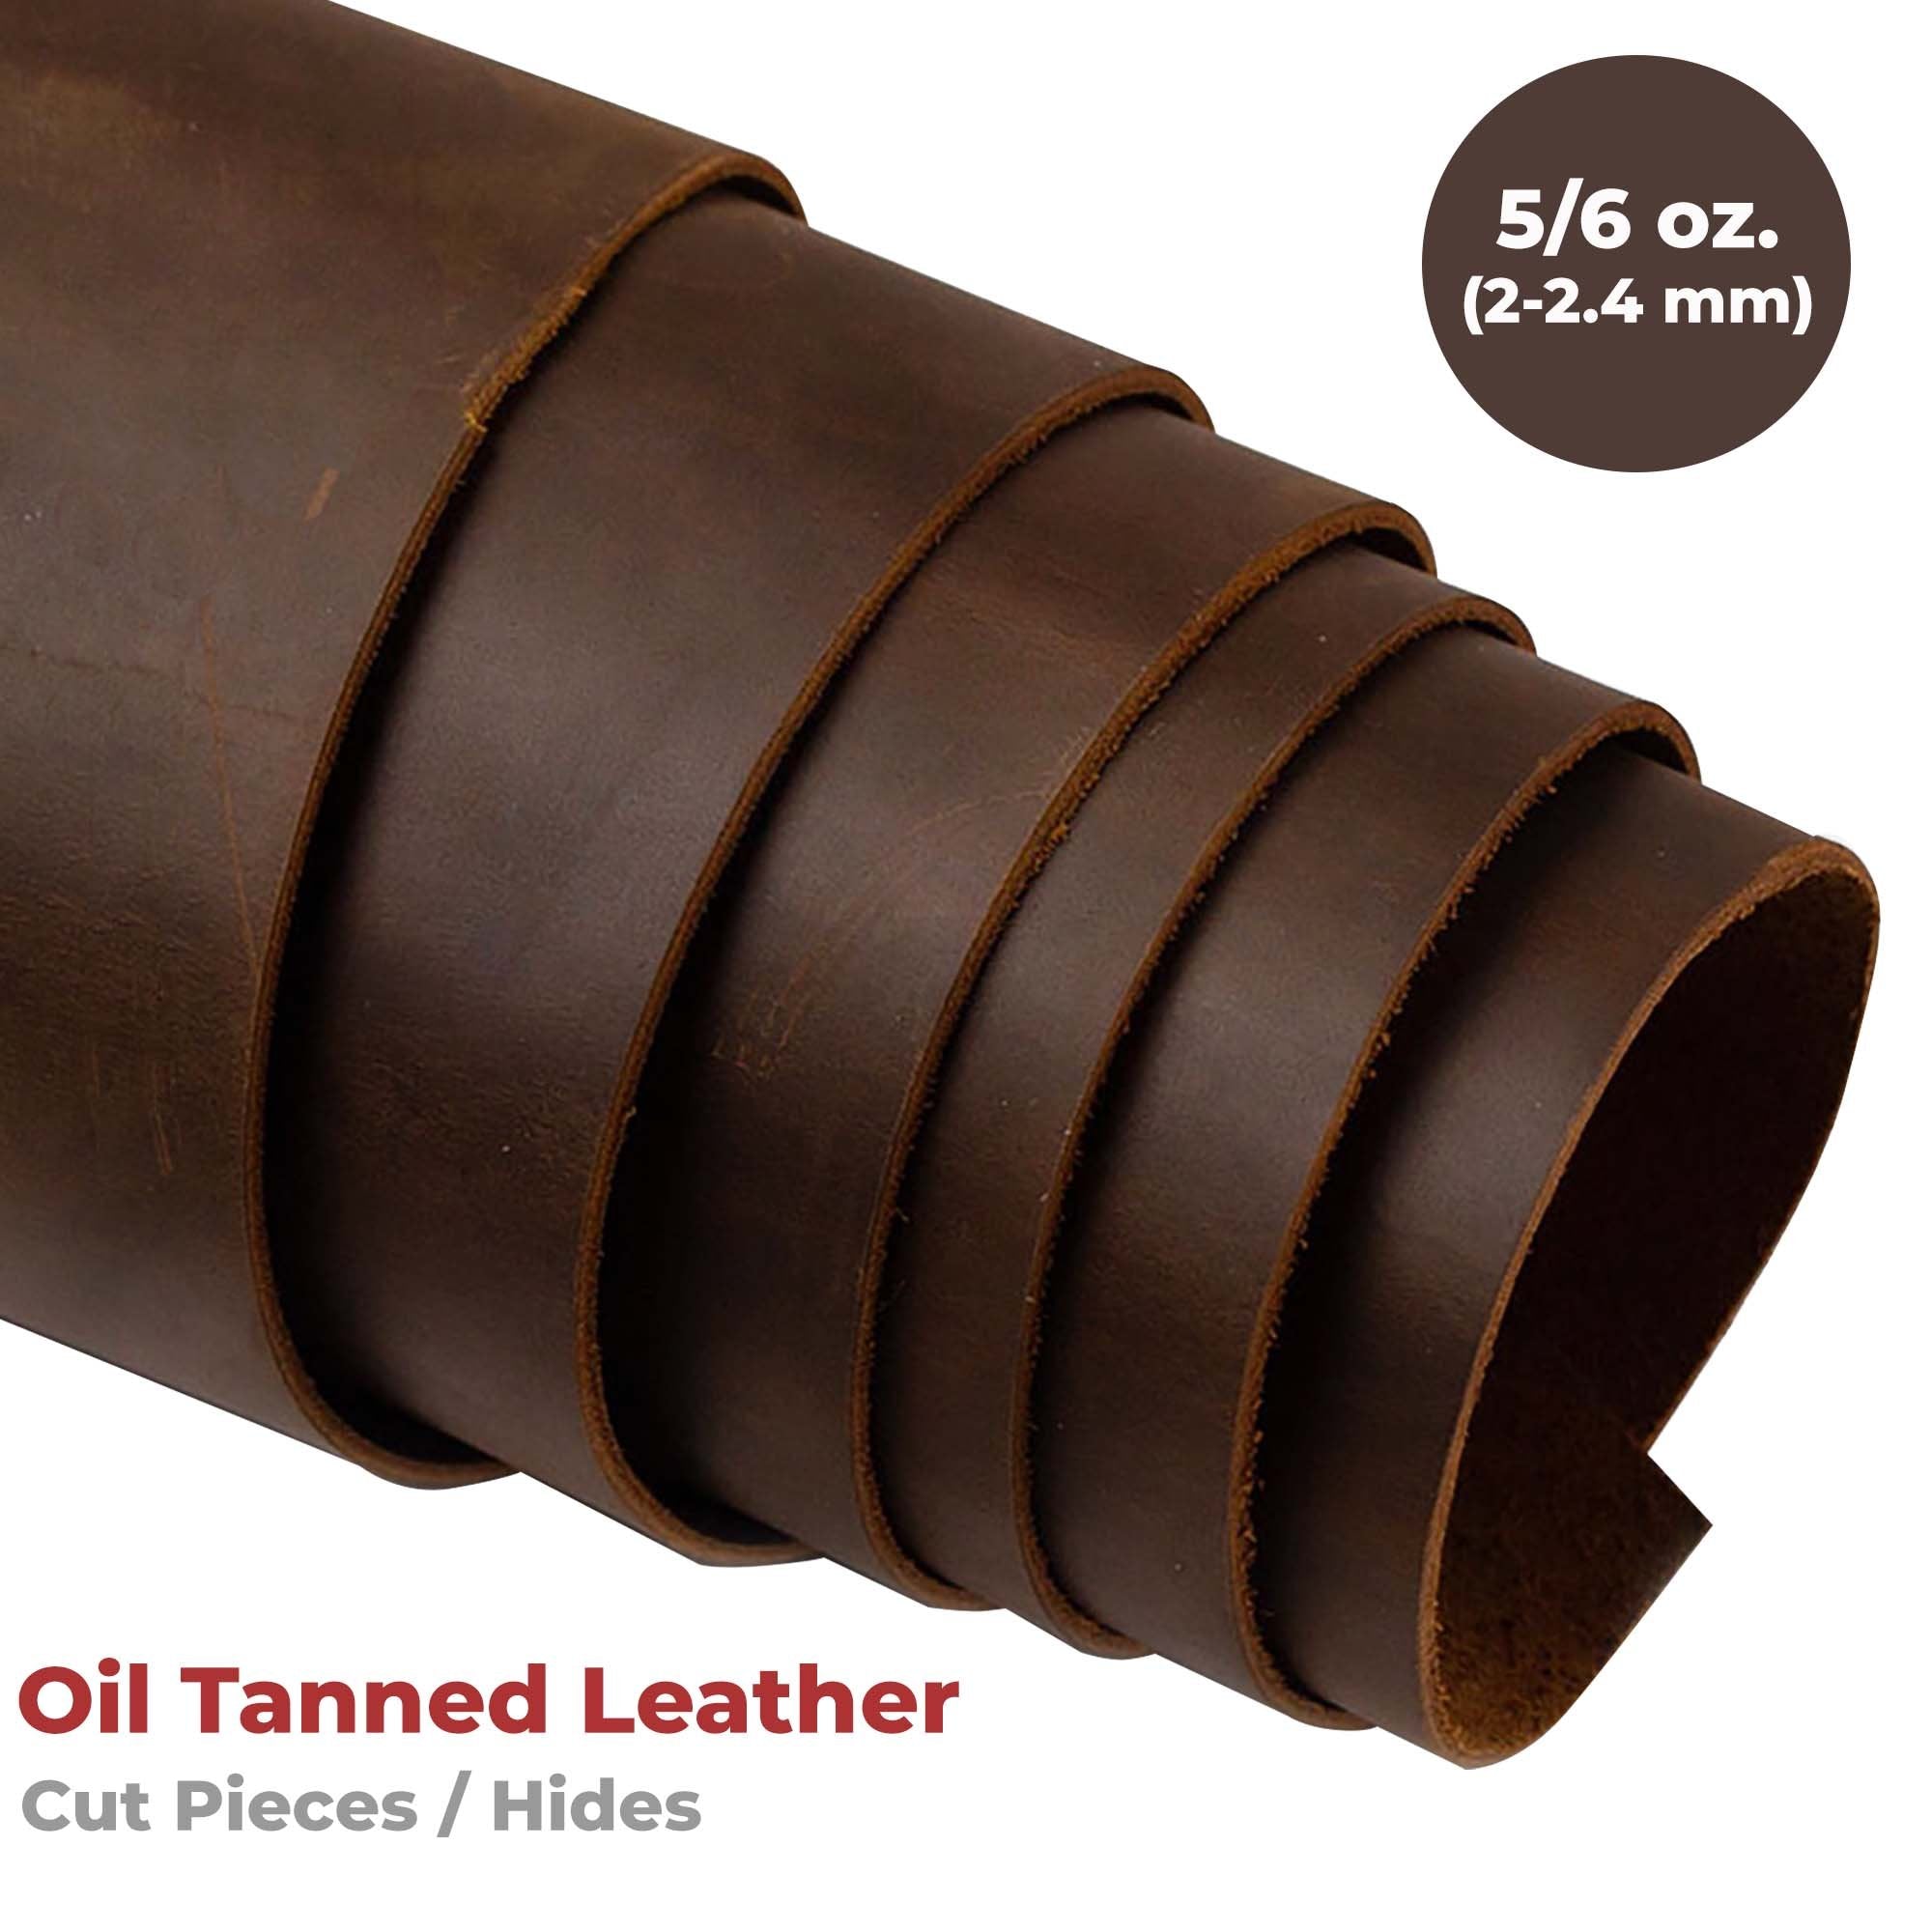 ELW Tooling Leather 5/6 OZ (2-2.4mm) Thickness, Burgundy Color